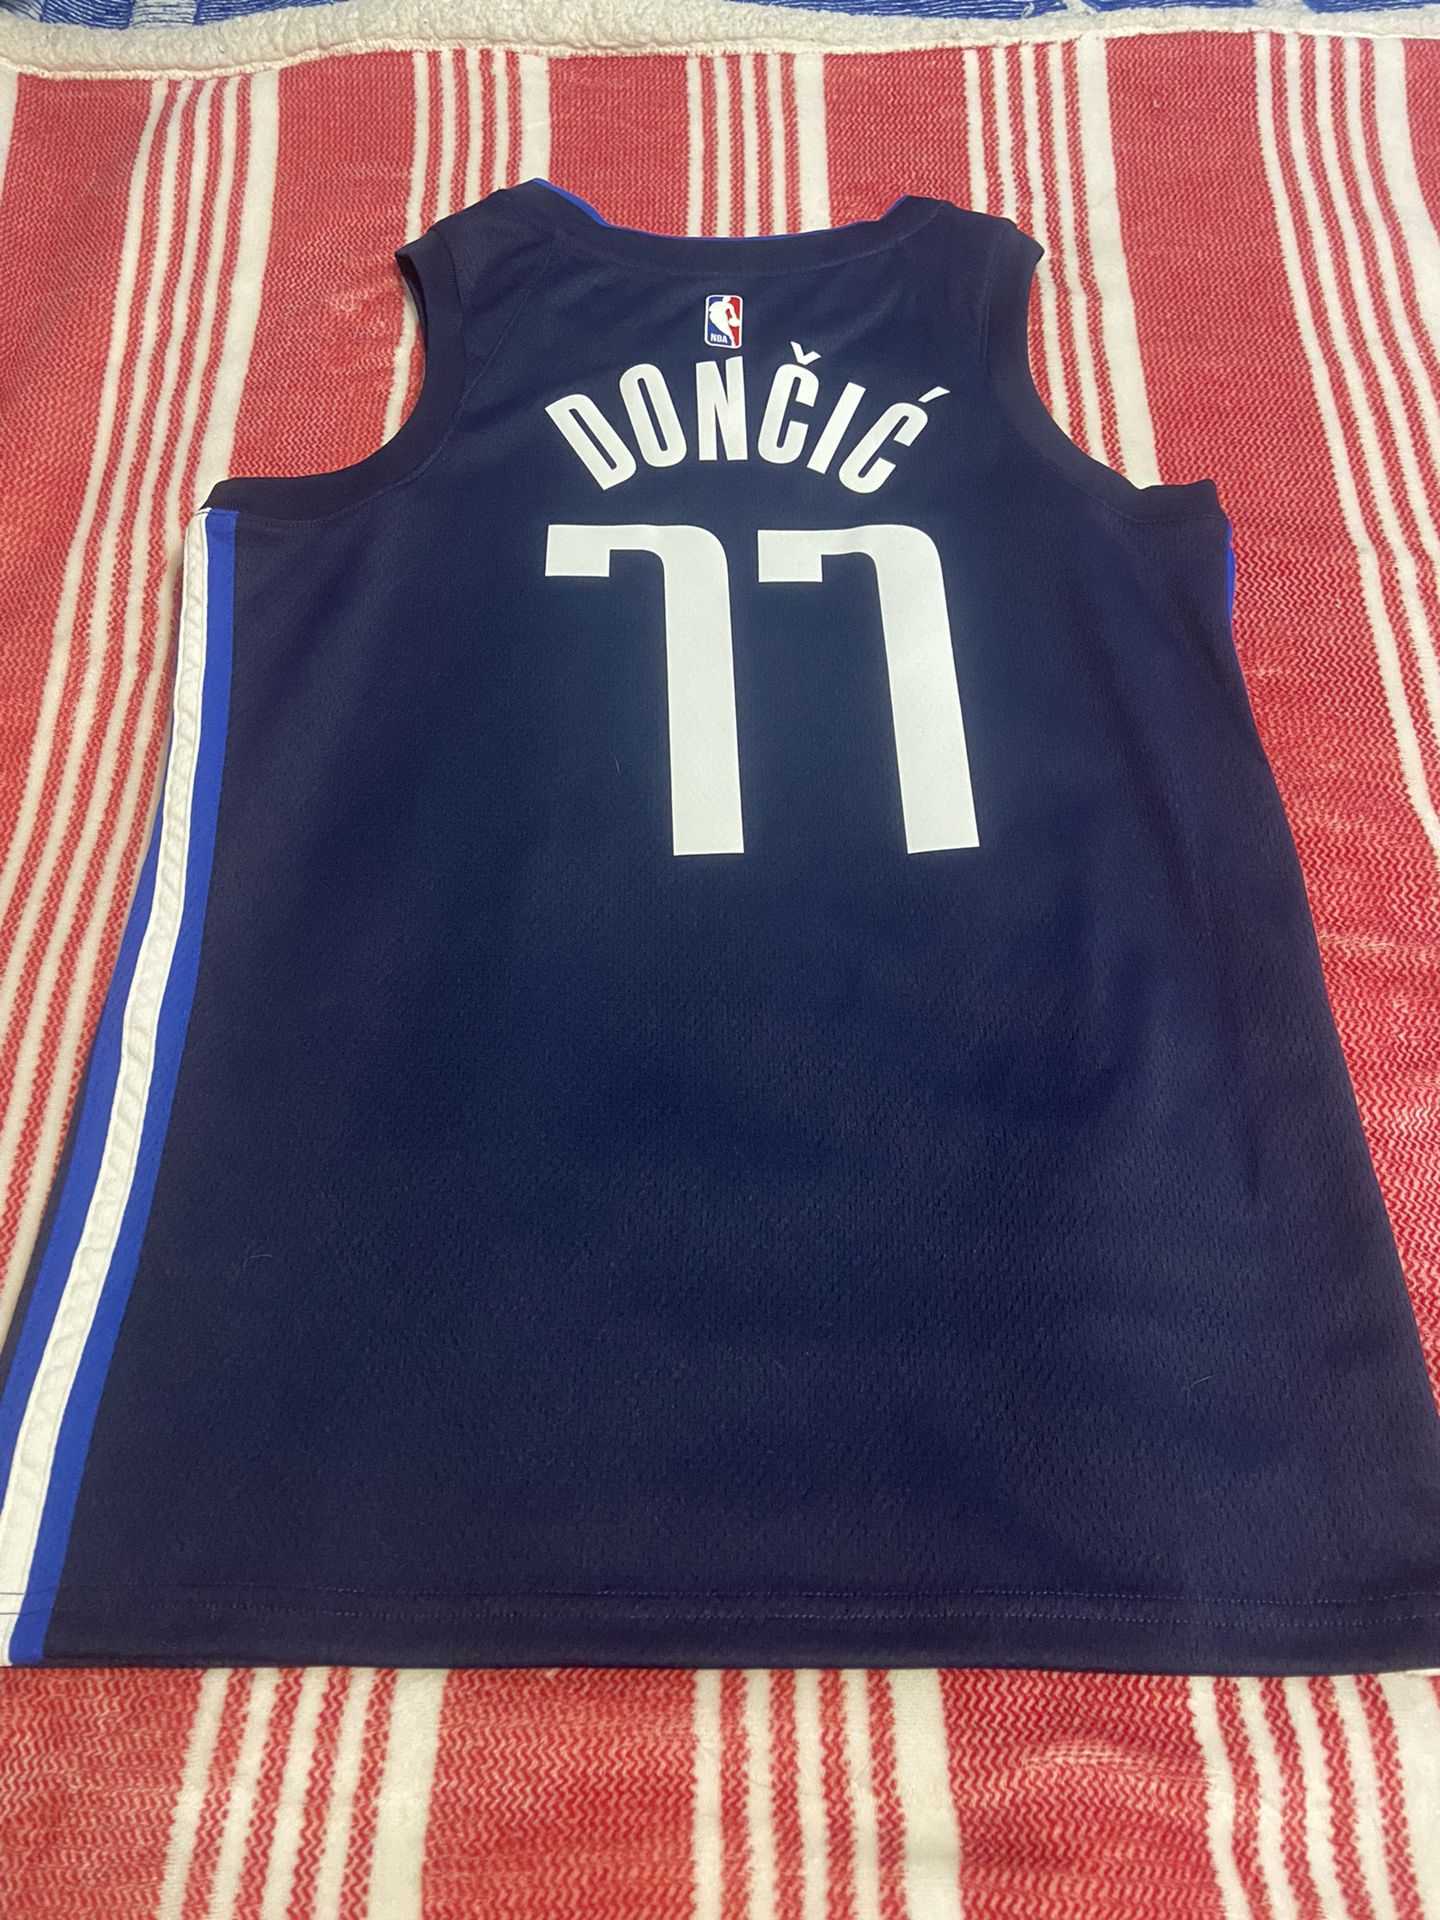 Dallas Mavericks Luka Doncic Jersey for Sale in Los Angeles, CA - OfferUp